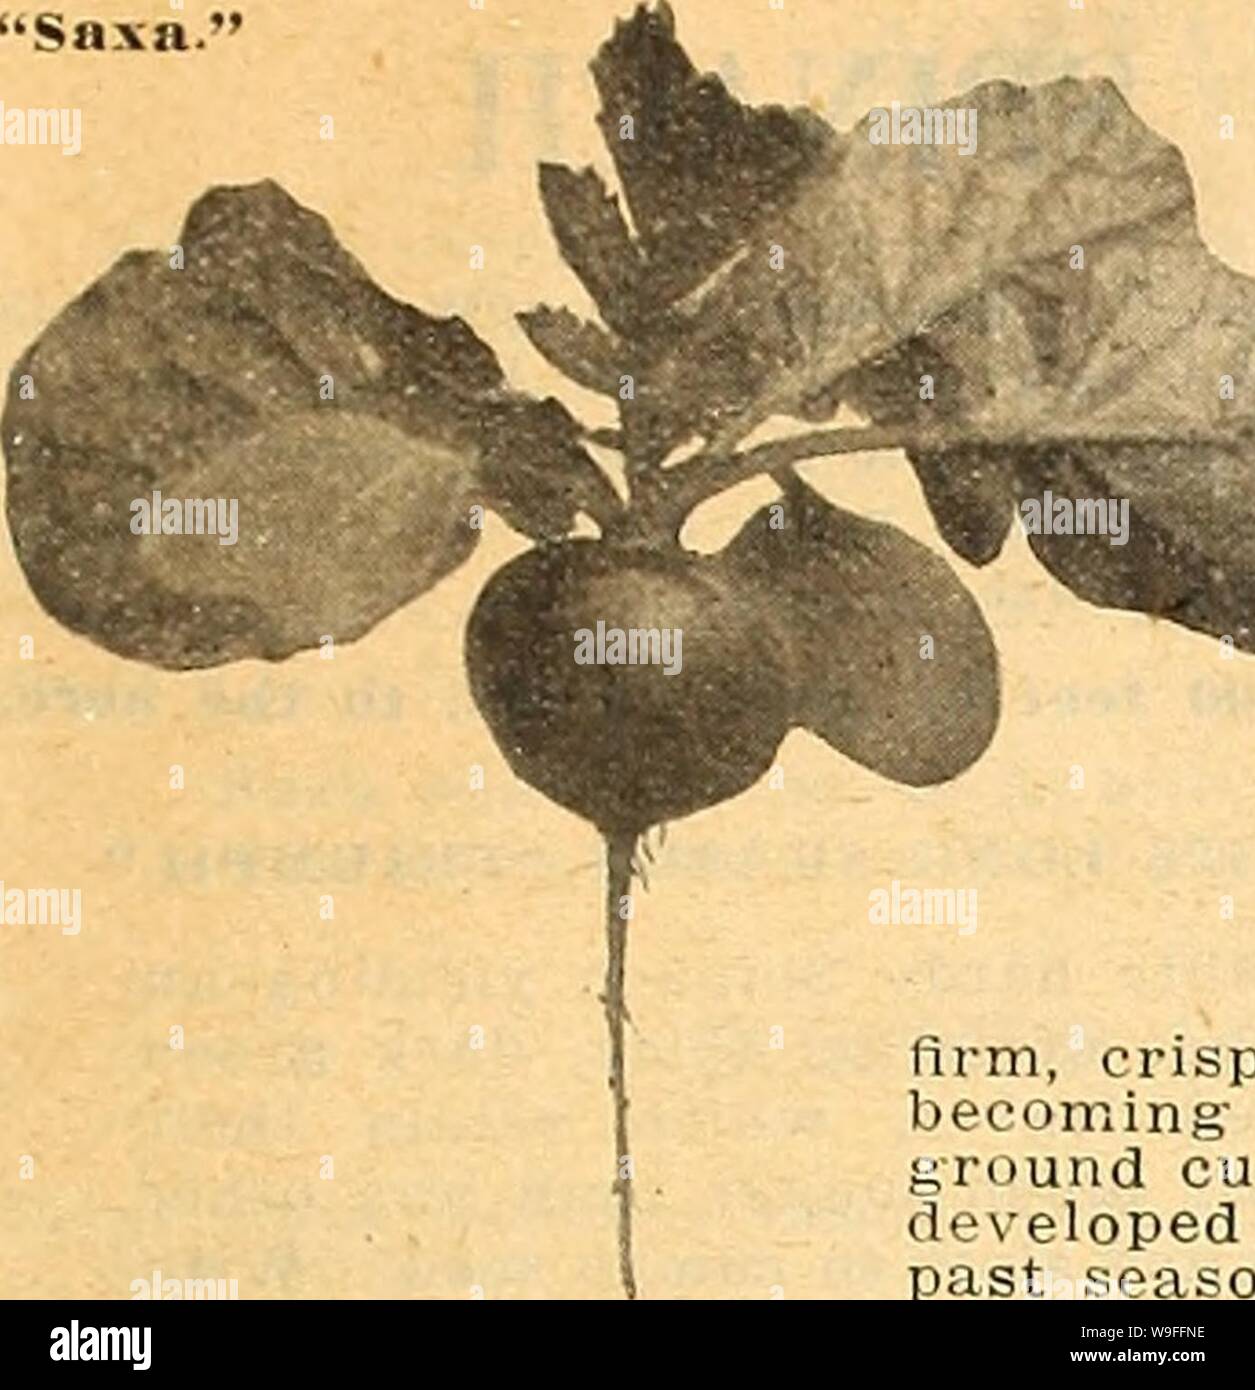 Archive image from page 38 of Currie's farm and garden annual. Currie's farm and garden annual : spring 1923 48th year  curriesfarmgarde19curr 6 Year: 1923 ( LIST OF TESTED GARDEN SEEDS FOR 1923. 33 'Saxa.    RADISH Culture—Radishes do best in a light sandy soil. For a successive supply sow from the middle of March until September, at intervals of two ) or three weeks. Sow in a hotbed for an early supply. One oz. to 100 feet of drill; 8 to 10 lbs. per acre in drills. 'SAXA'—A fiery scarlet, perfectly globular in shape, the leaves small and the root the thinnest possible tail. In less than thre Stock Photo